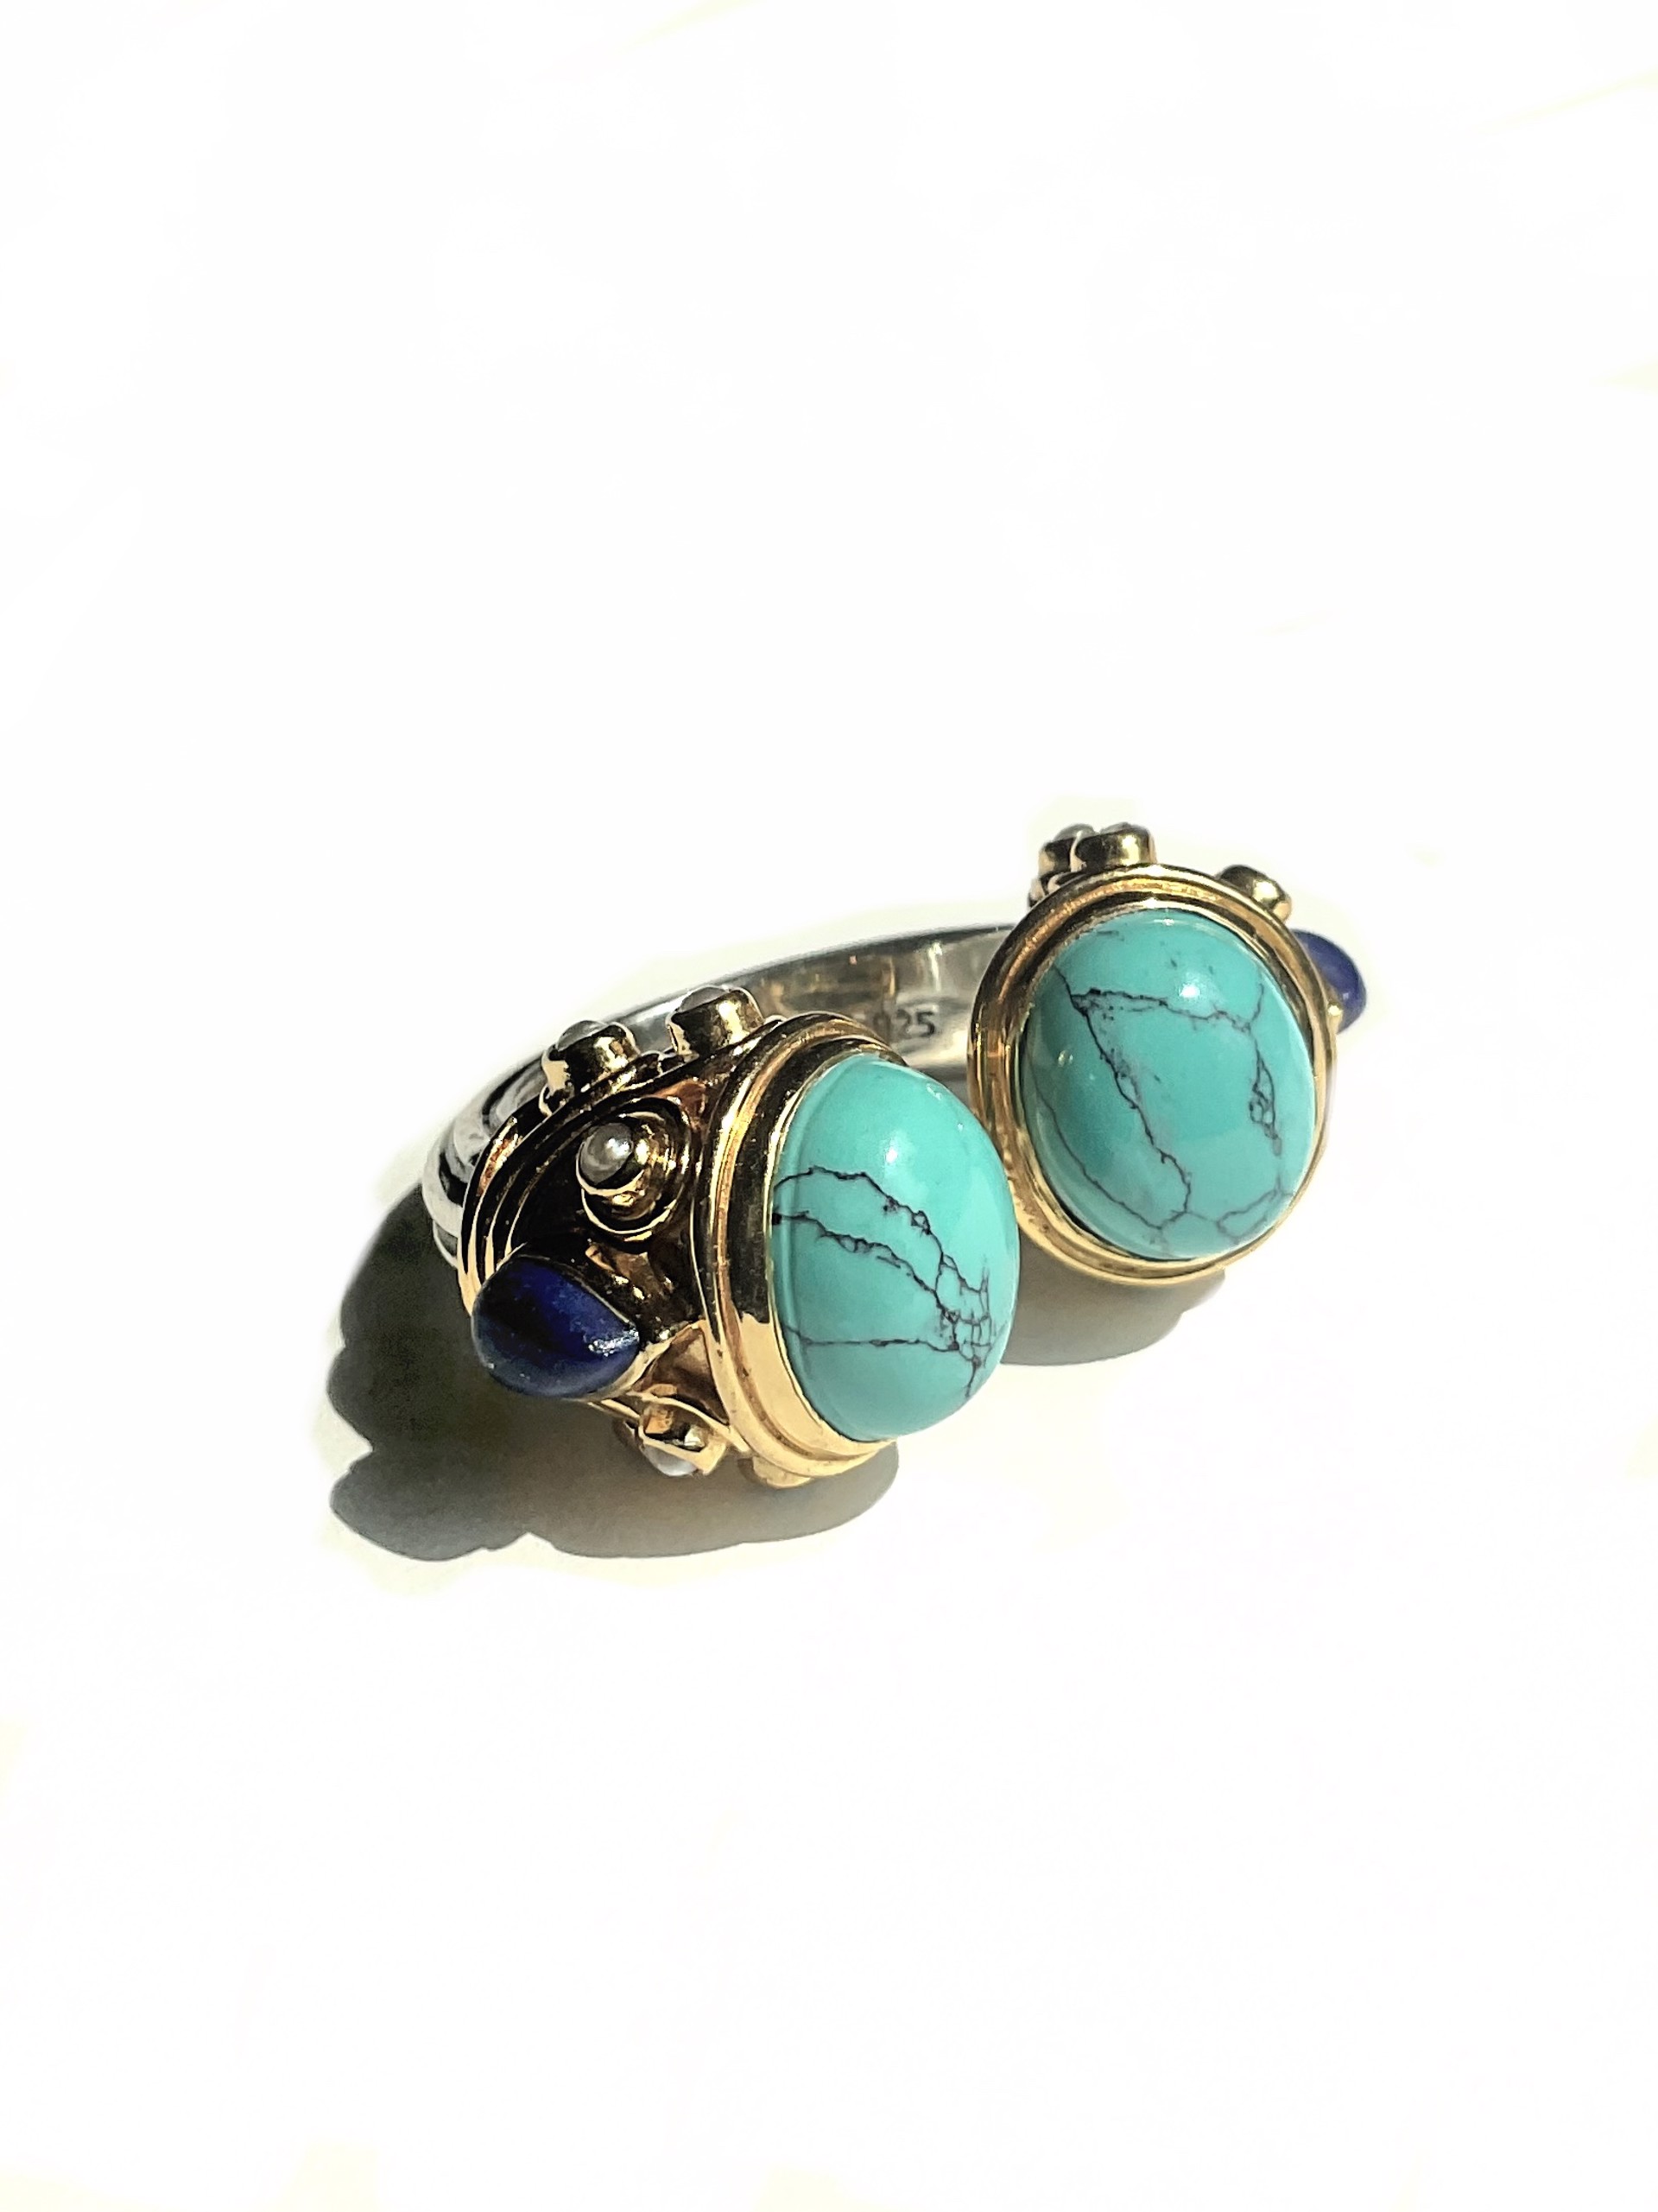 Turquoise and Lapis Cuff Style Ring by J. Catma